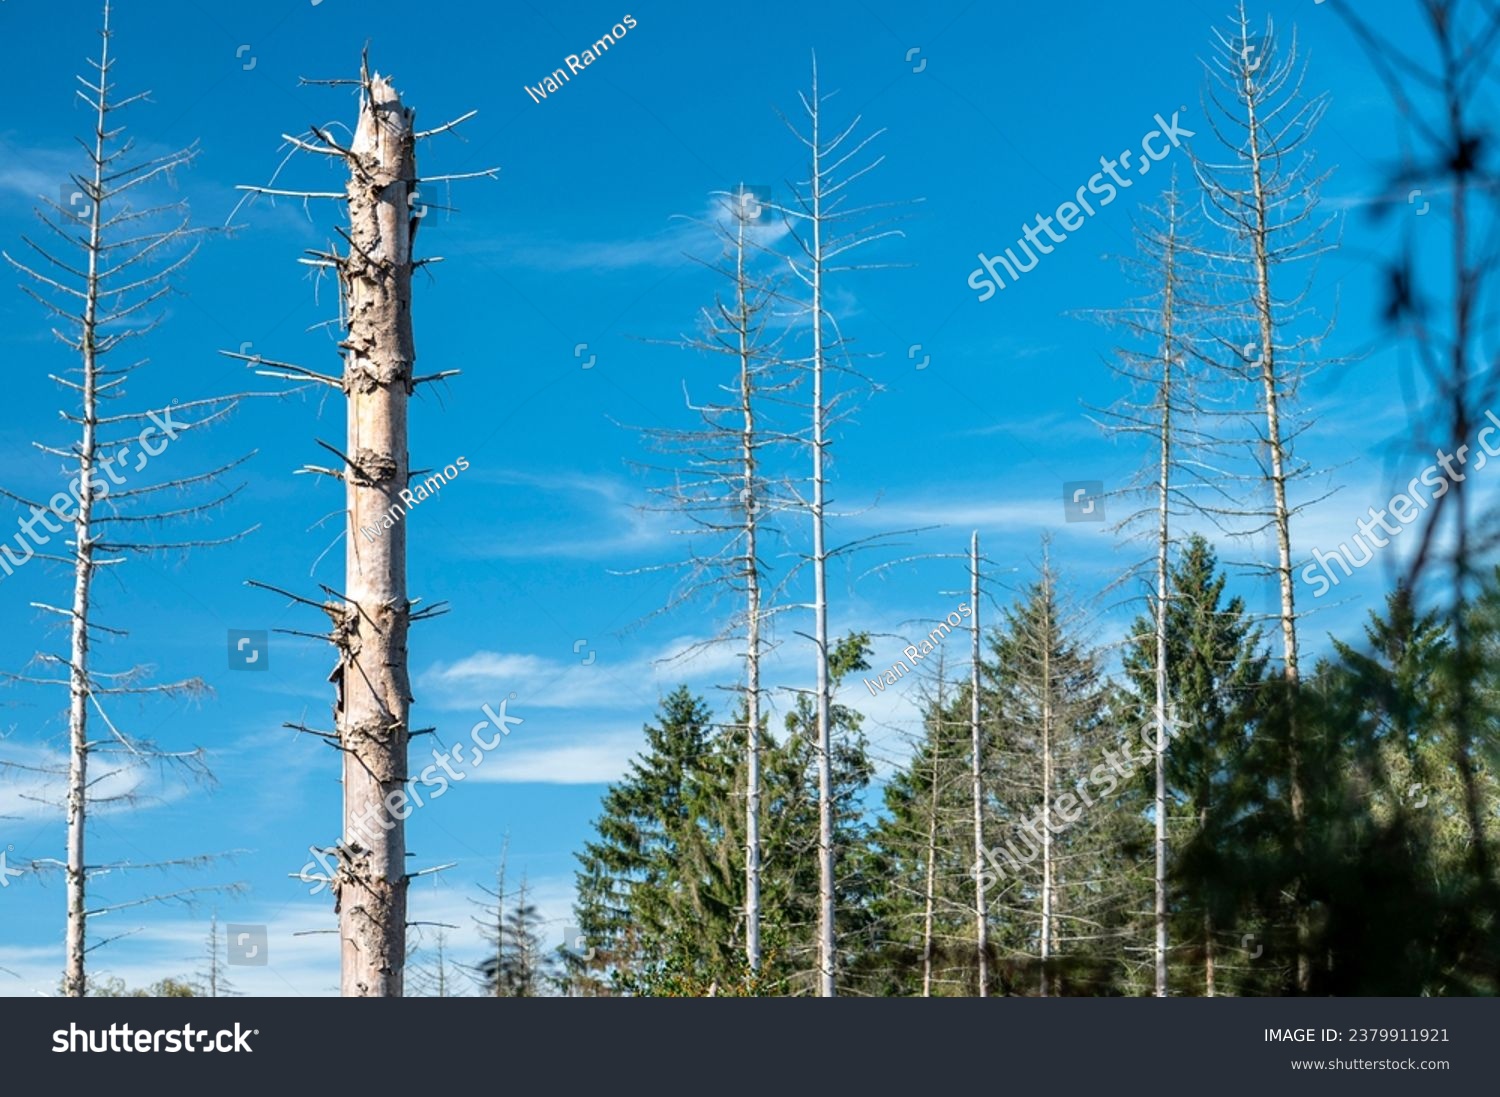 Dead trees with blue sky and forest in the background at Meinweg forest in the border between Germany and Netherlands. #2379911921